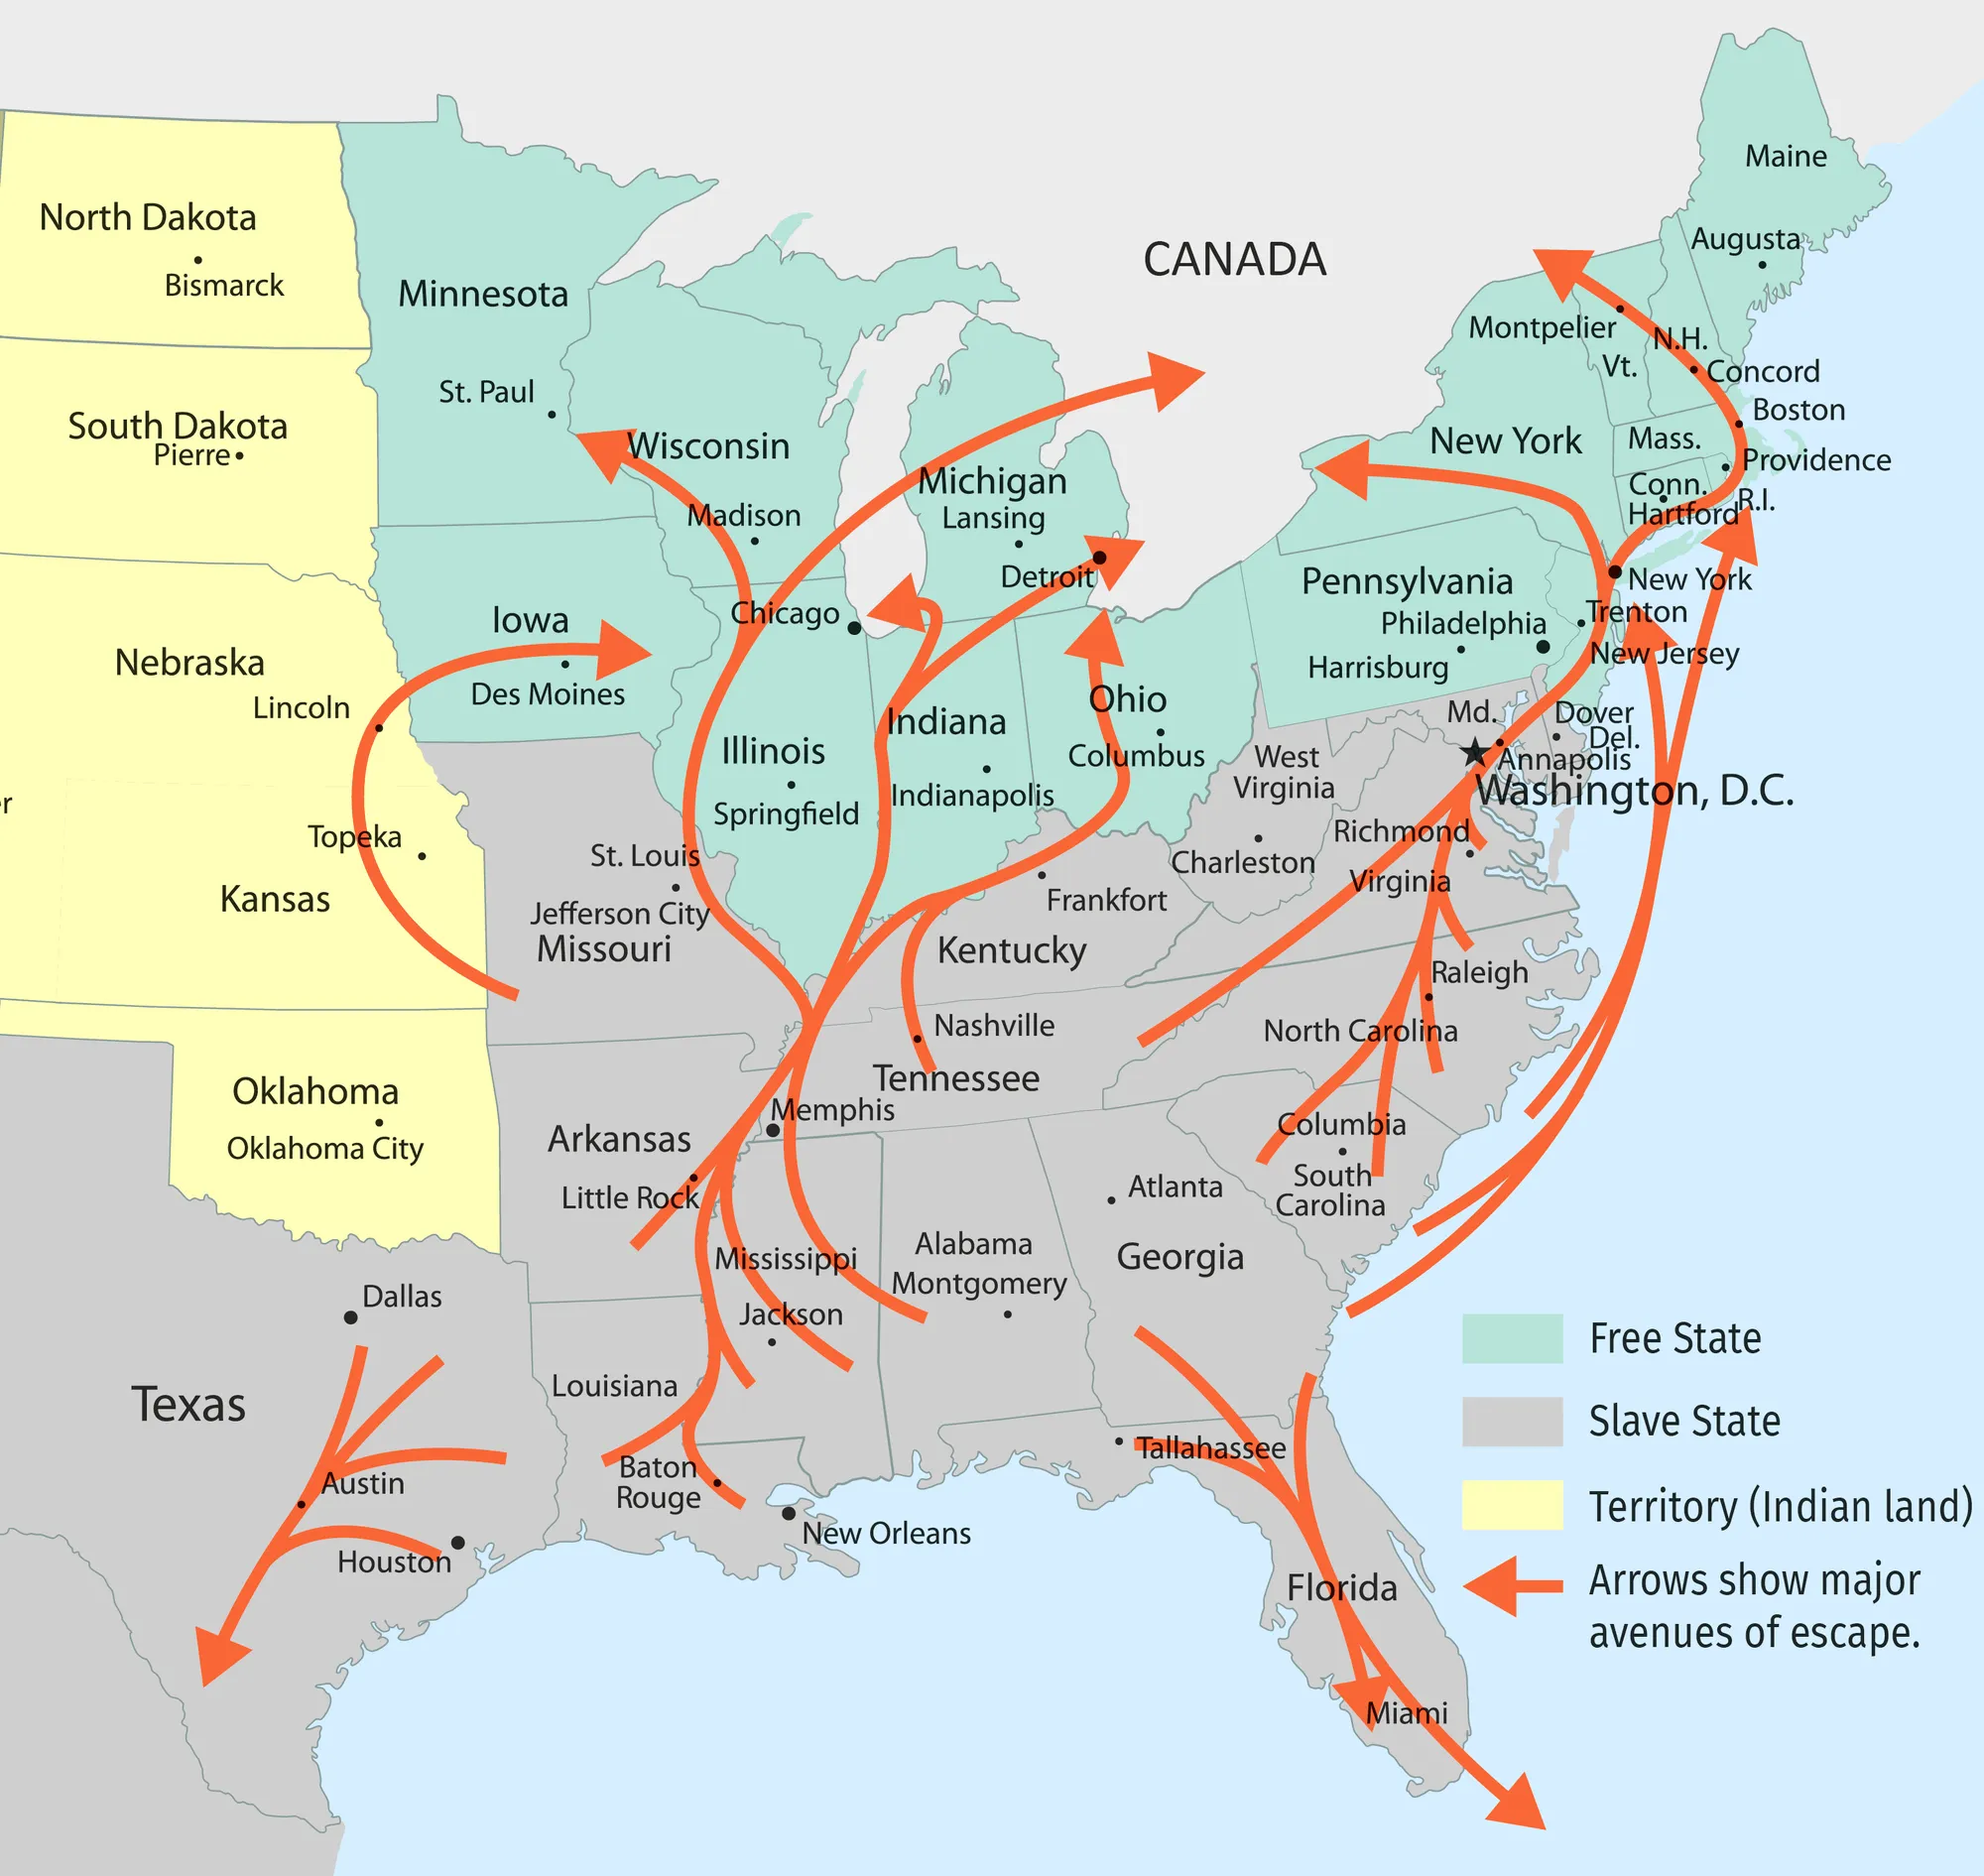 The Underground Railroad, the main routes for the escapees in the 1850s.